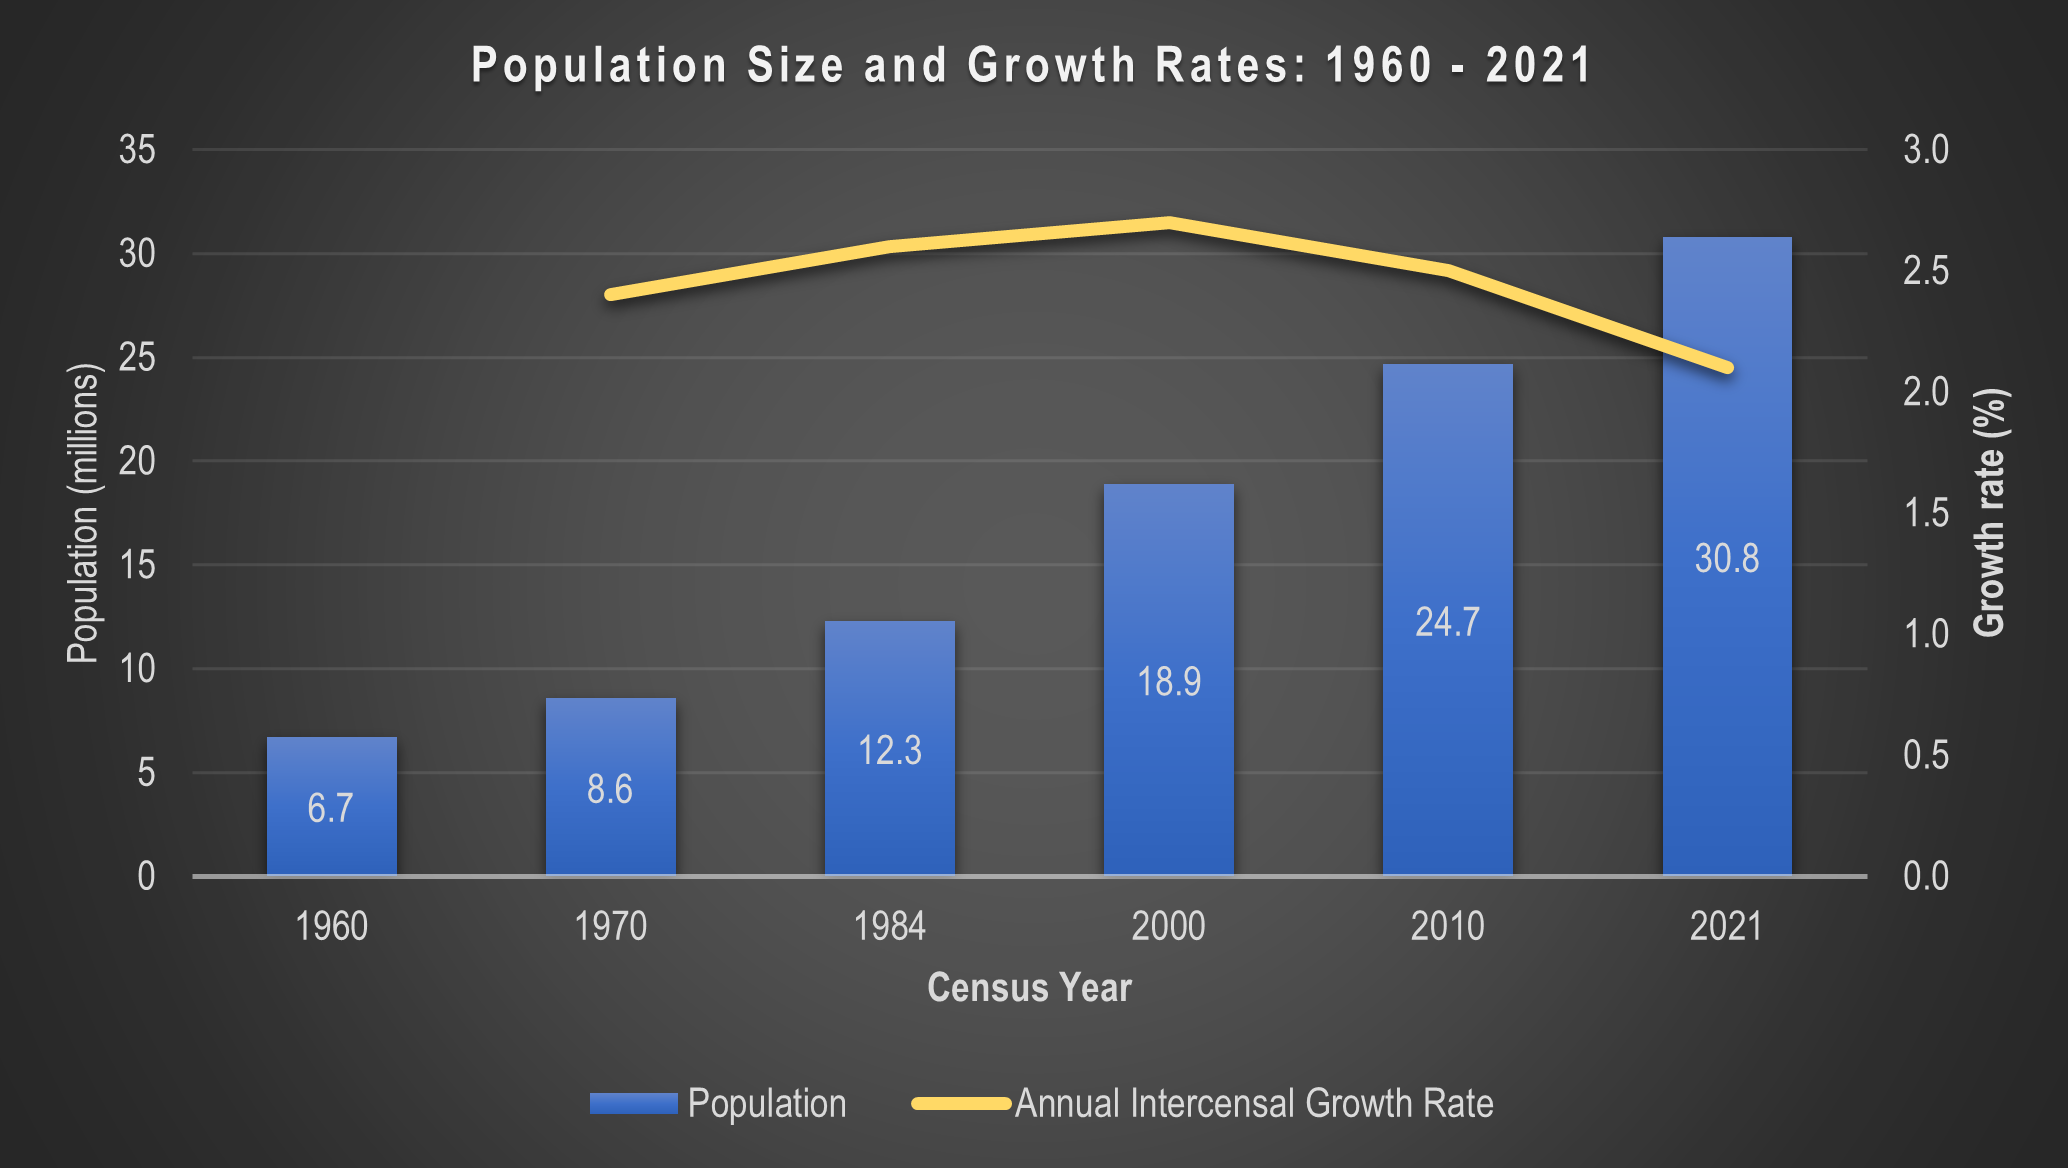 Population size and growth rates